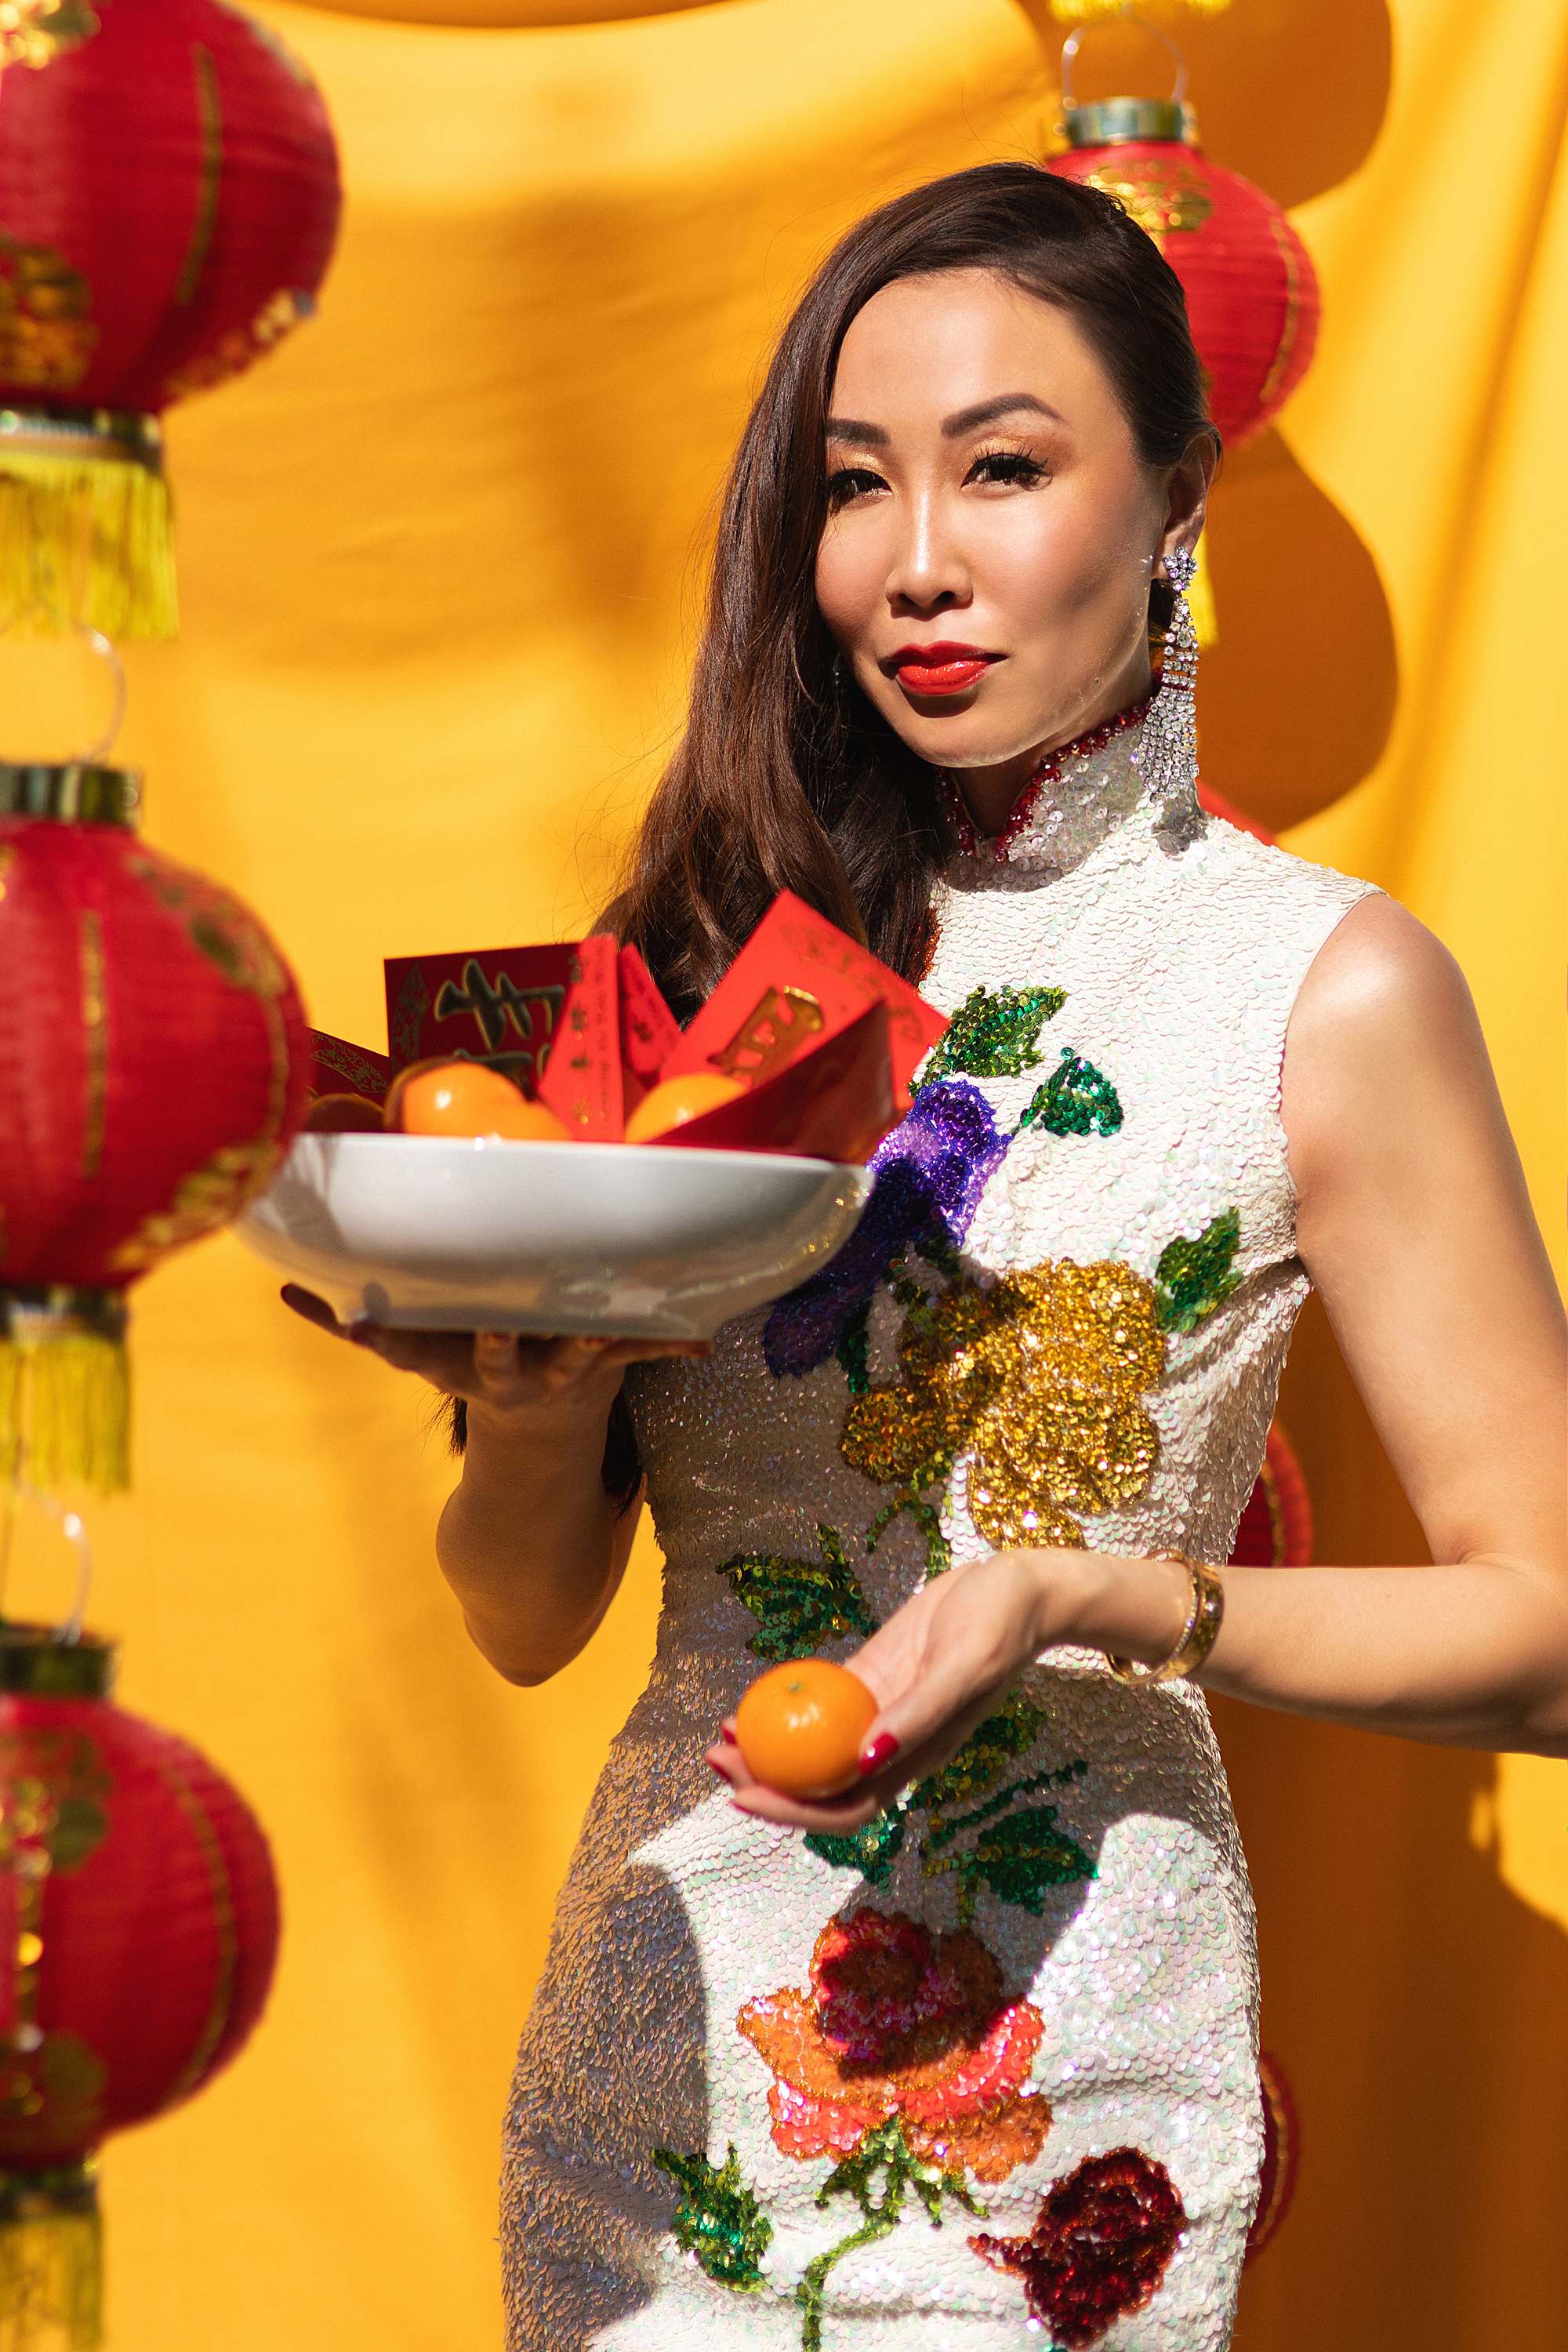 Chinese New Year lunar new year outfit and festivities - growing up Asian American blog post - DianaElizabethblog.com // Chinese girl in traditional sequin Chinese dress (c) Diana Elizabeth Photography, LLC